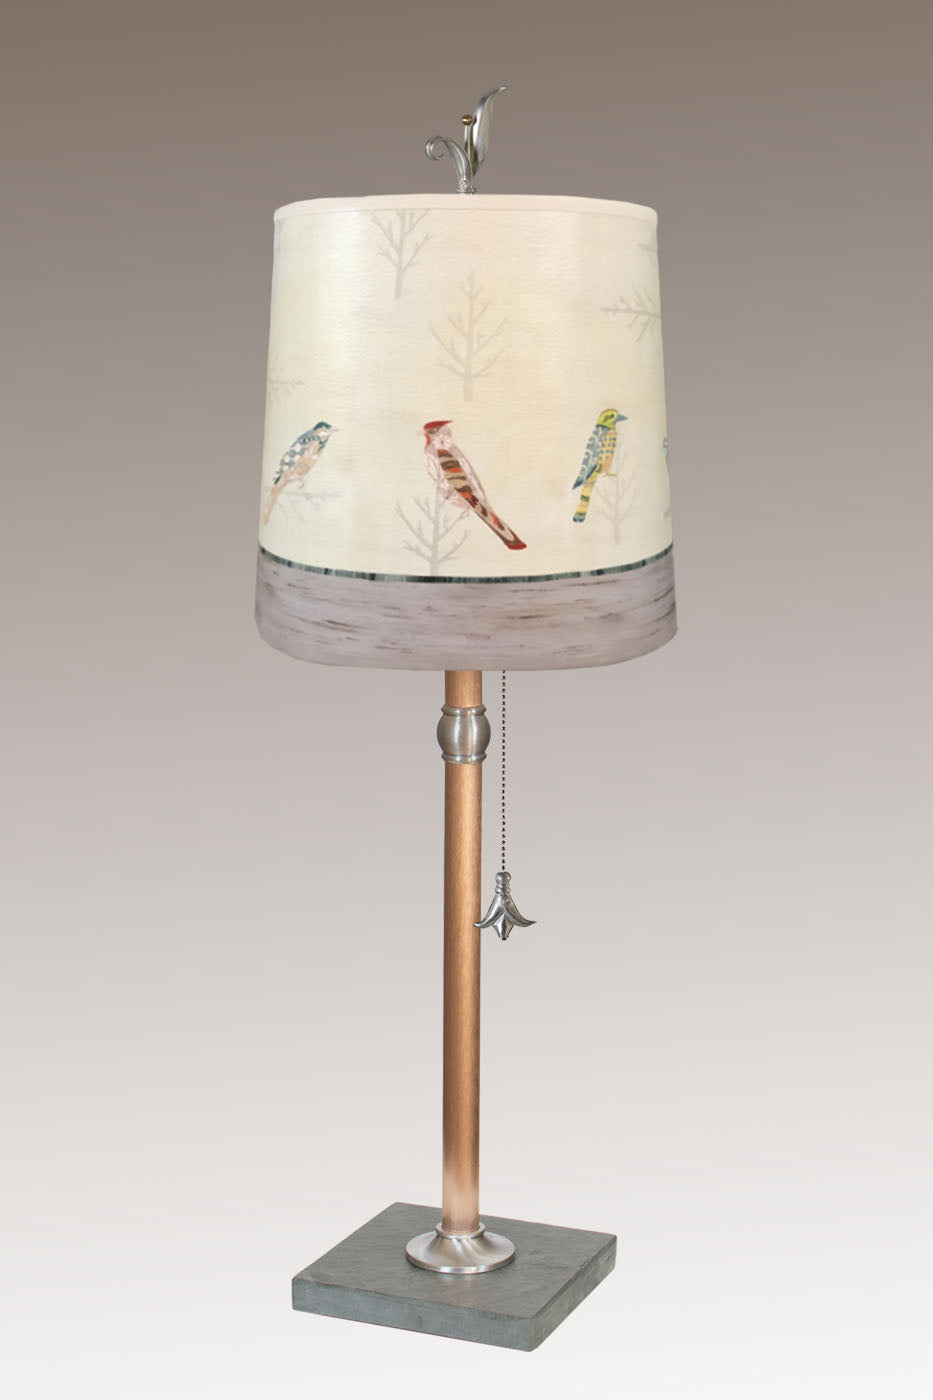 Janna Ugone & Co Table Lamps Copper Table Lamp with Medium Drum Shade in Bird Friends